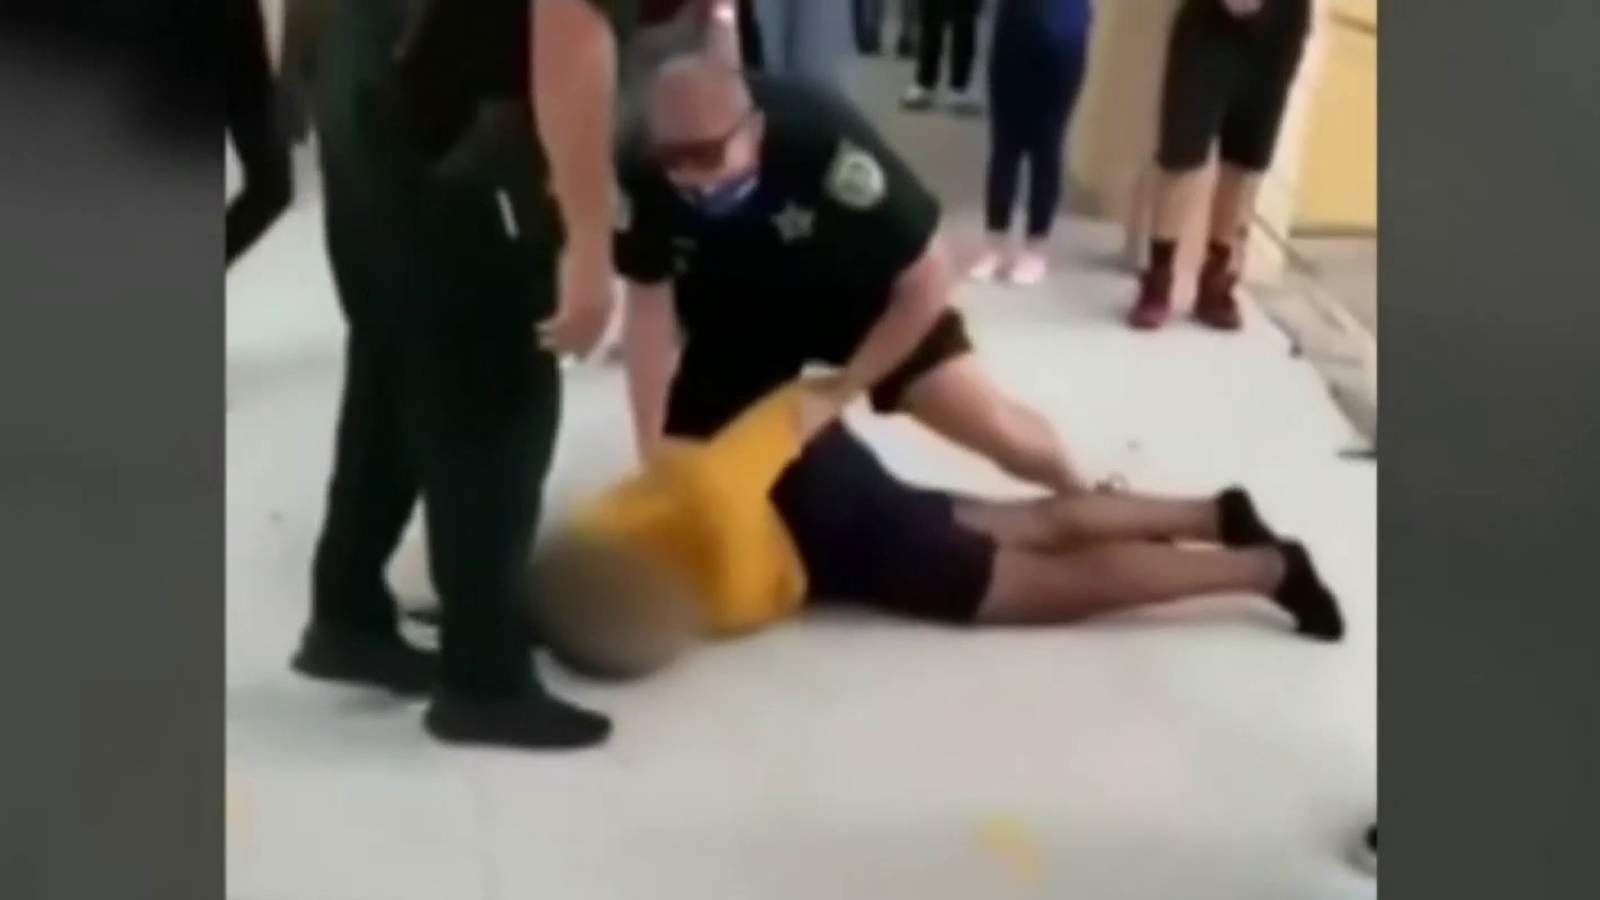 FDLE seeks witnesses, videos after Liberty High School student slammed to ground